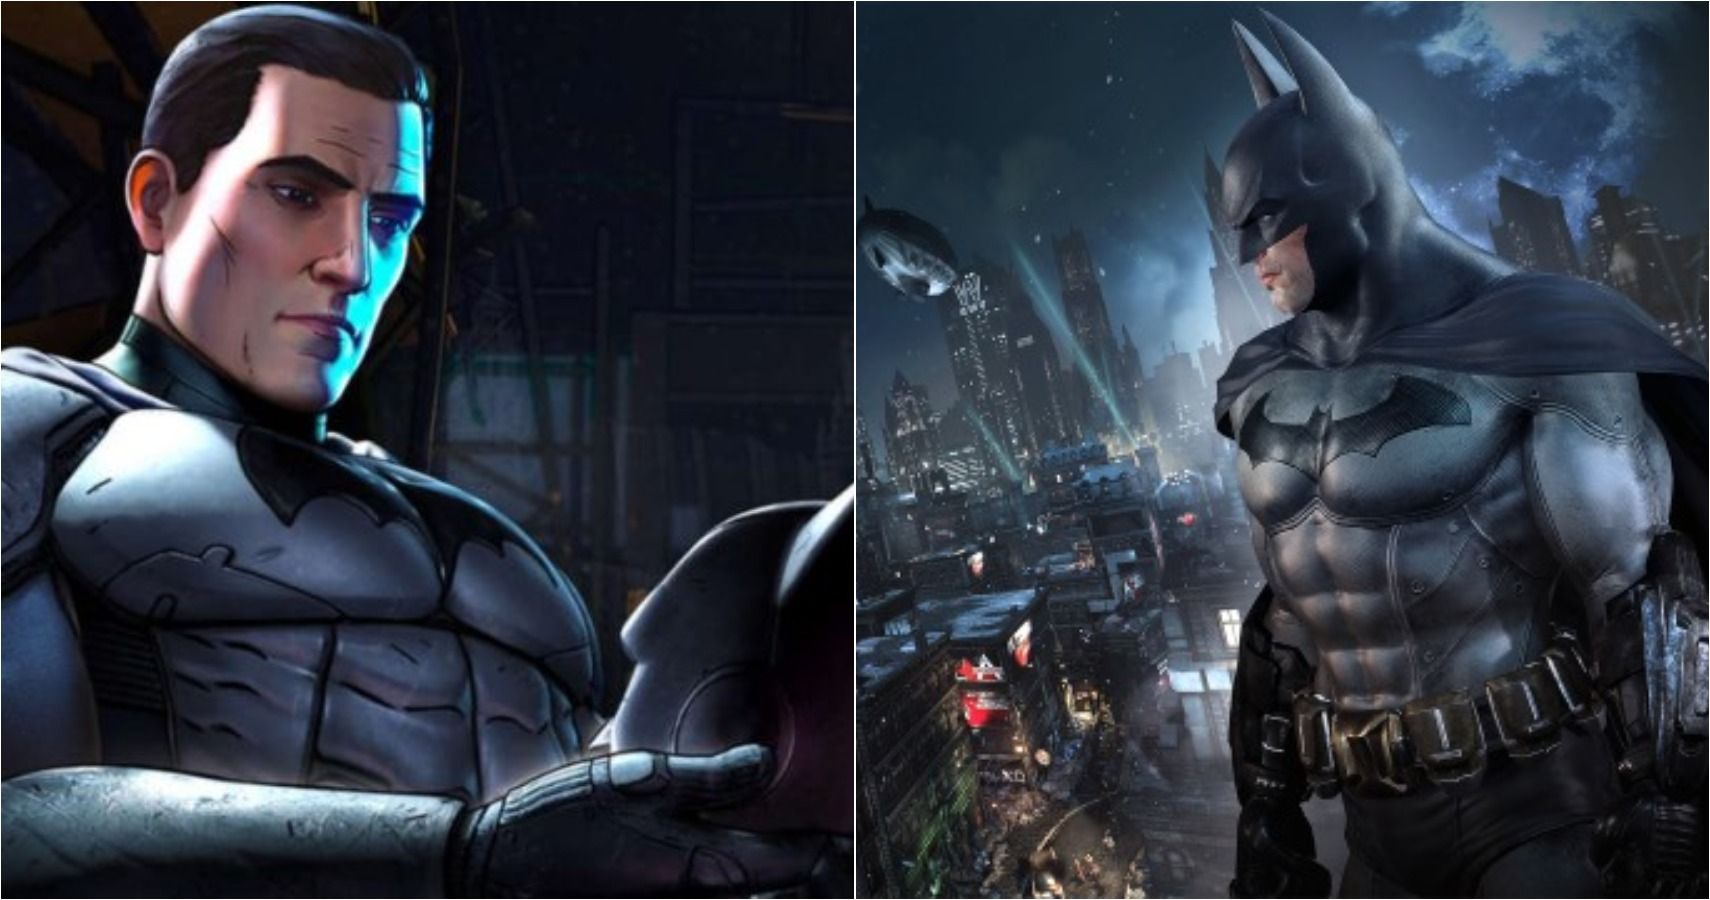 Batman Telltale Series: 5 Things The Story Does Better Than The